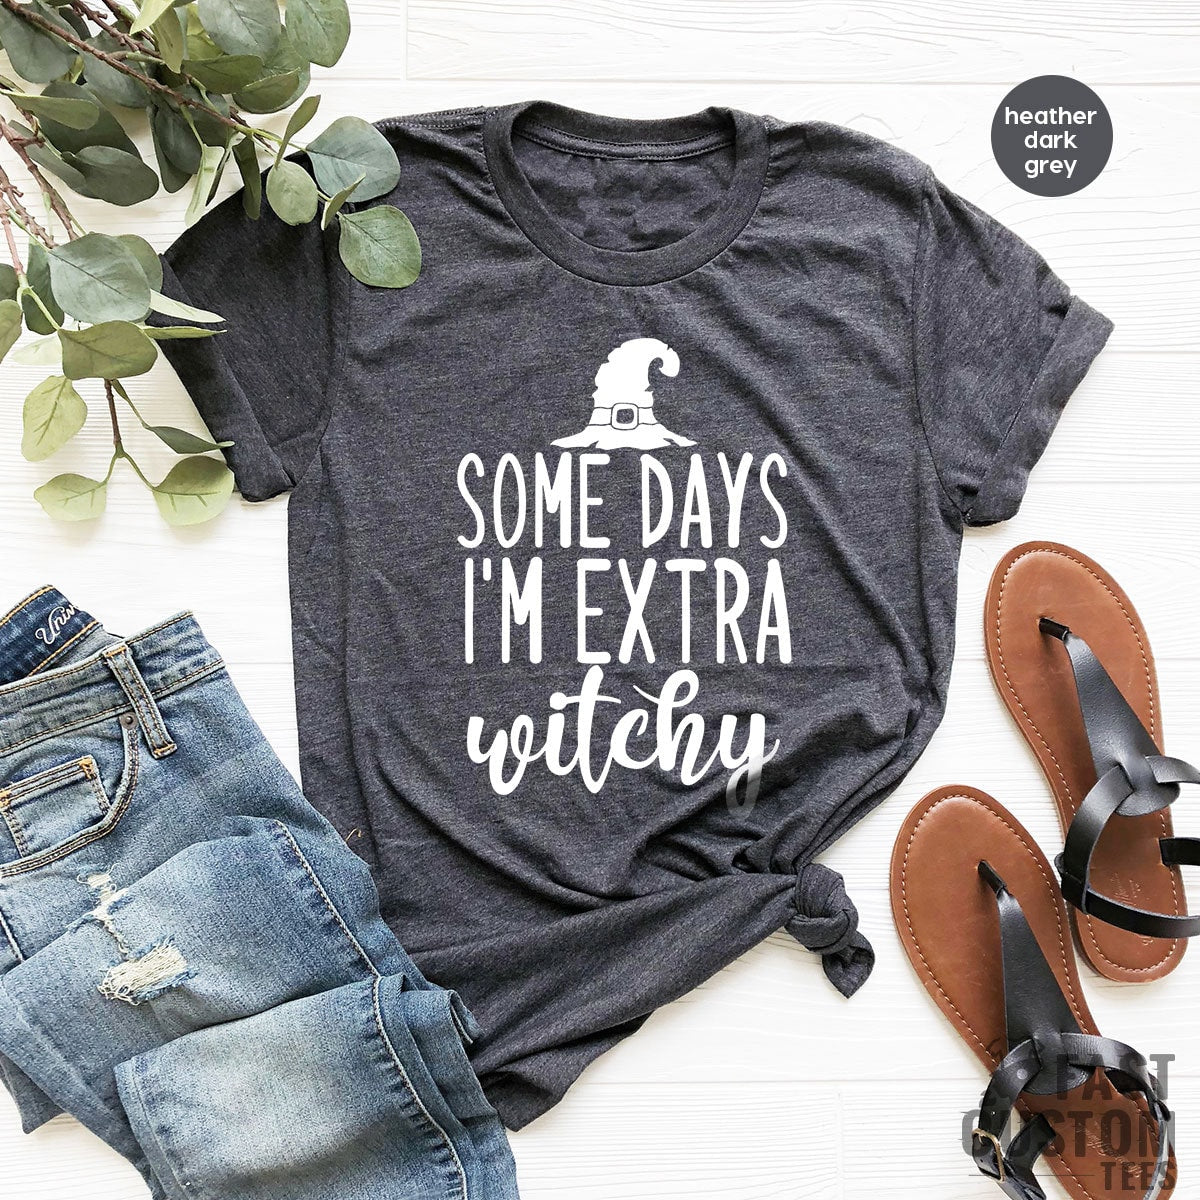 Some Days I'm Extra Witchy Shirt, Halloween Shirt, Mom Shirt, Witch Shirt, Funny Halloween Shirt For Women, Halloween Gift - Fastdeliverytees.com